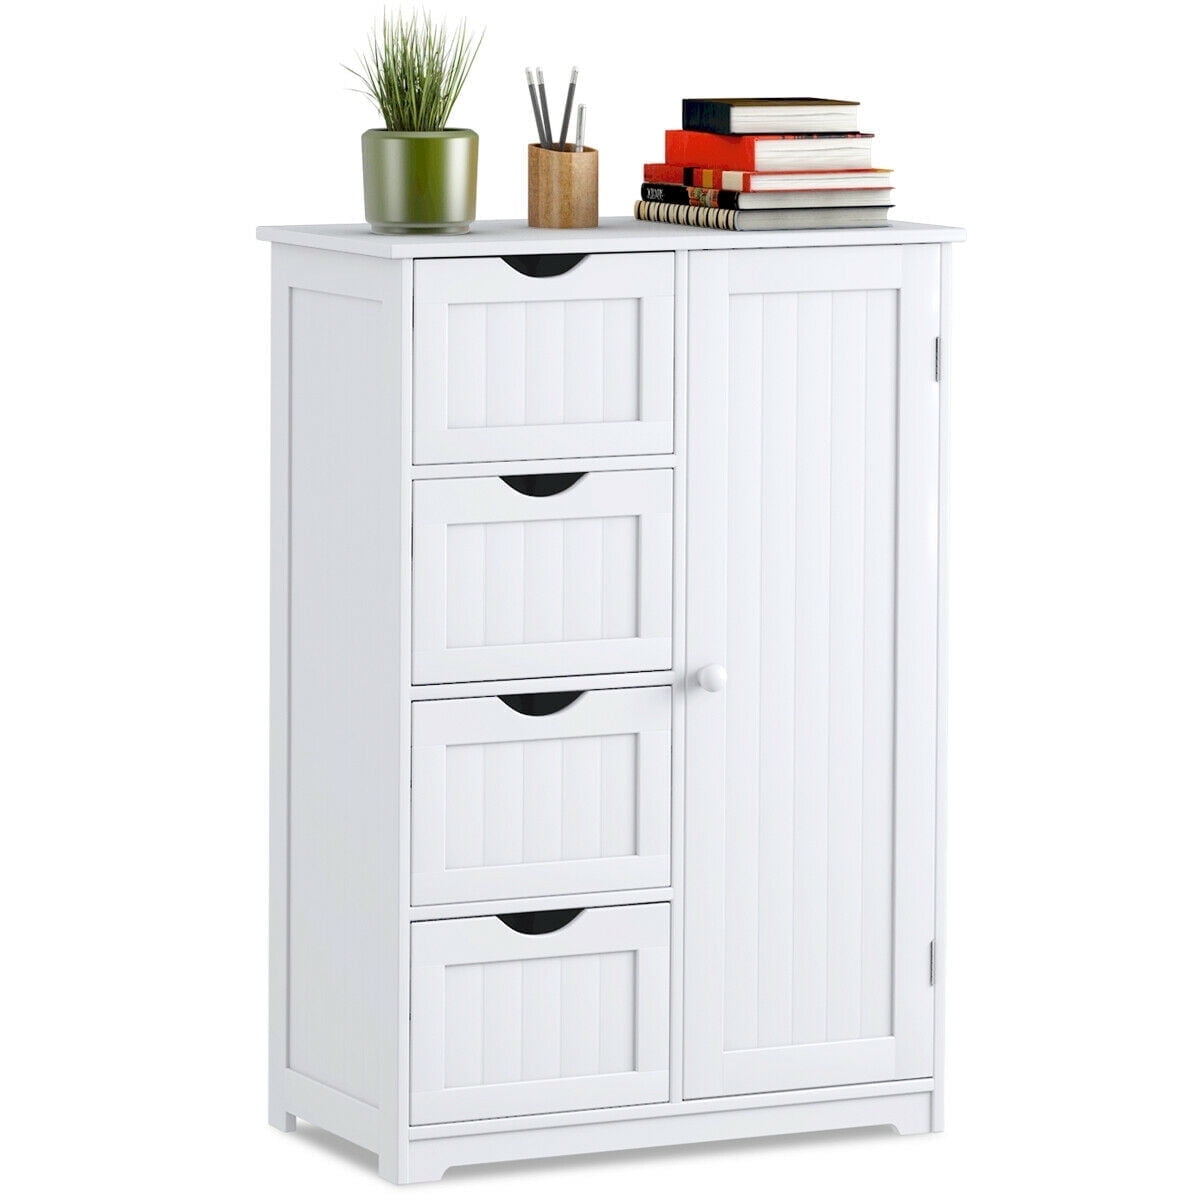 Costway Wooden 4 Drawer Bathroom Cabinet Storage Cupboard 2 Shelves Free Standing White - image 1 of 10